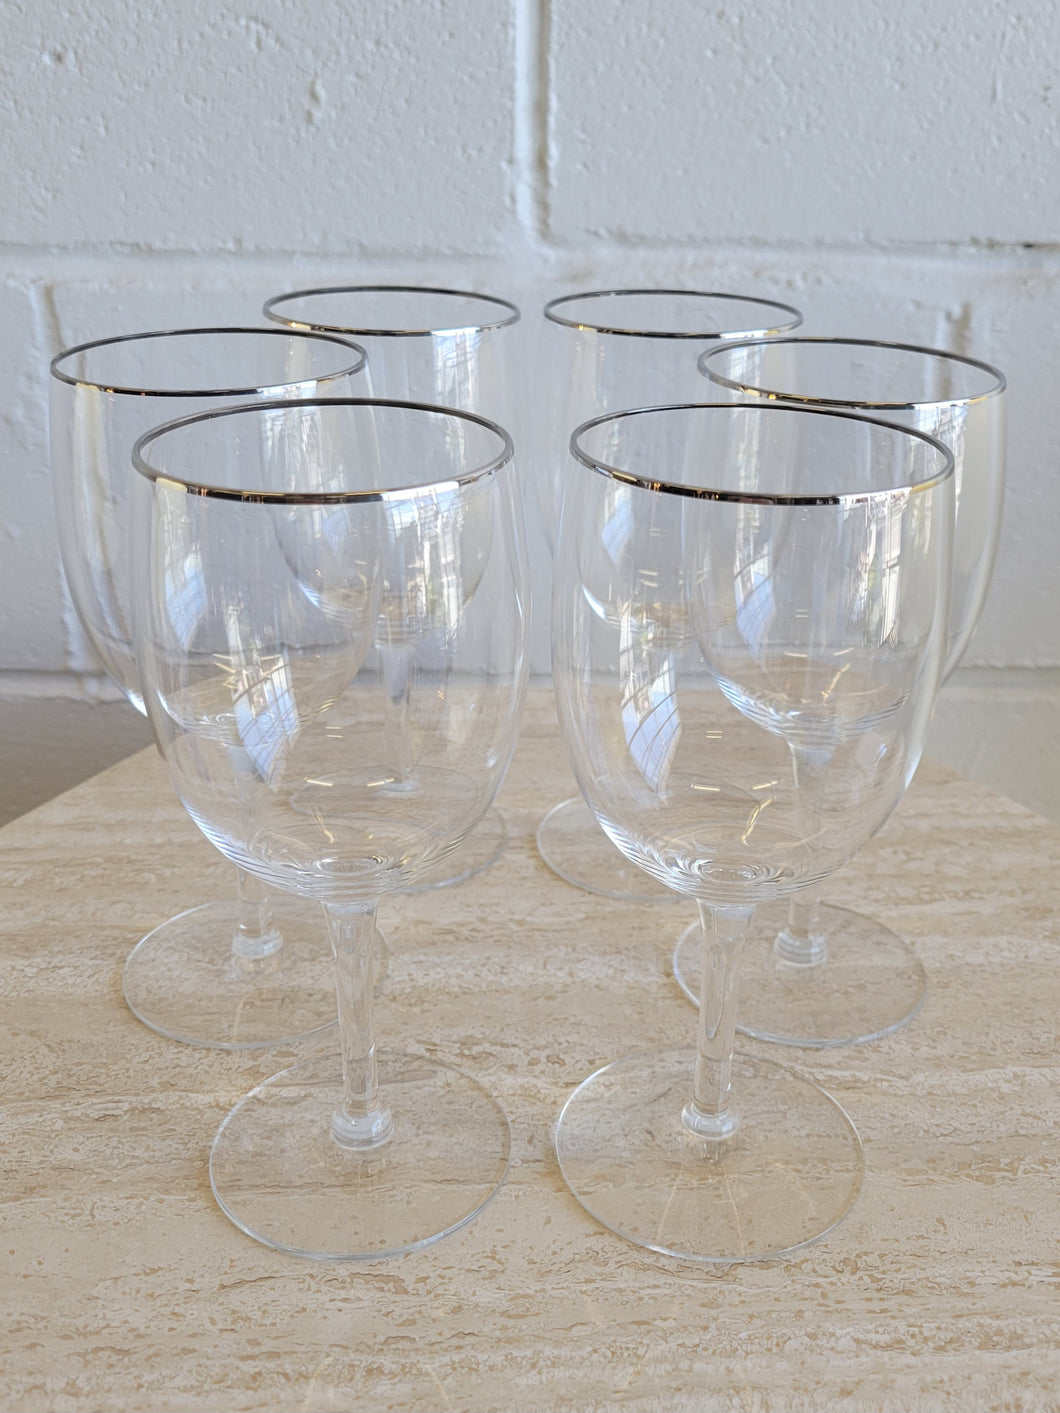 6 Count Silver Rimmed Crystal Wine Glasses